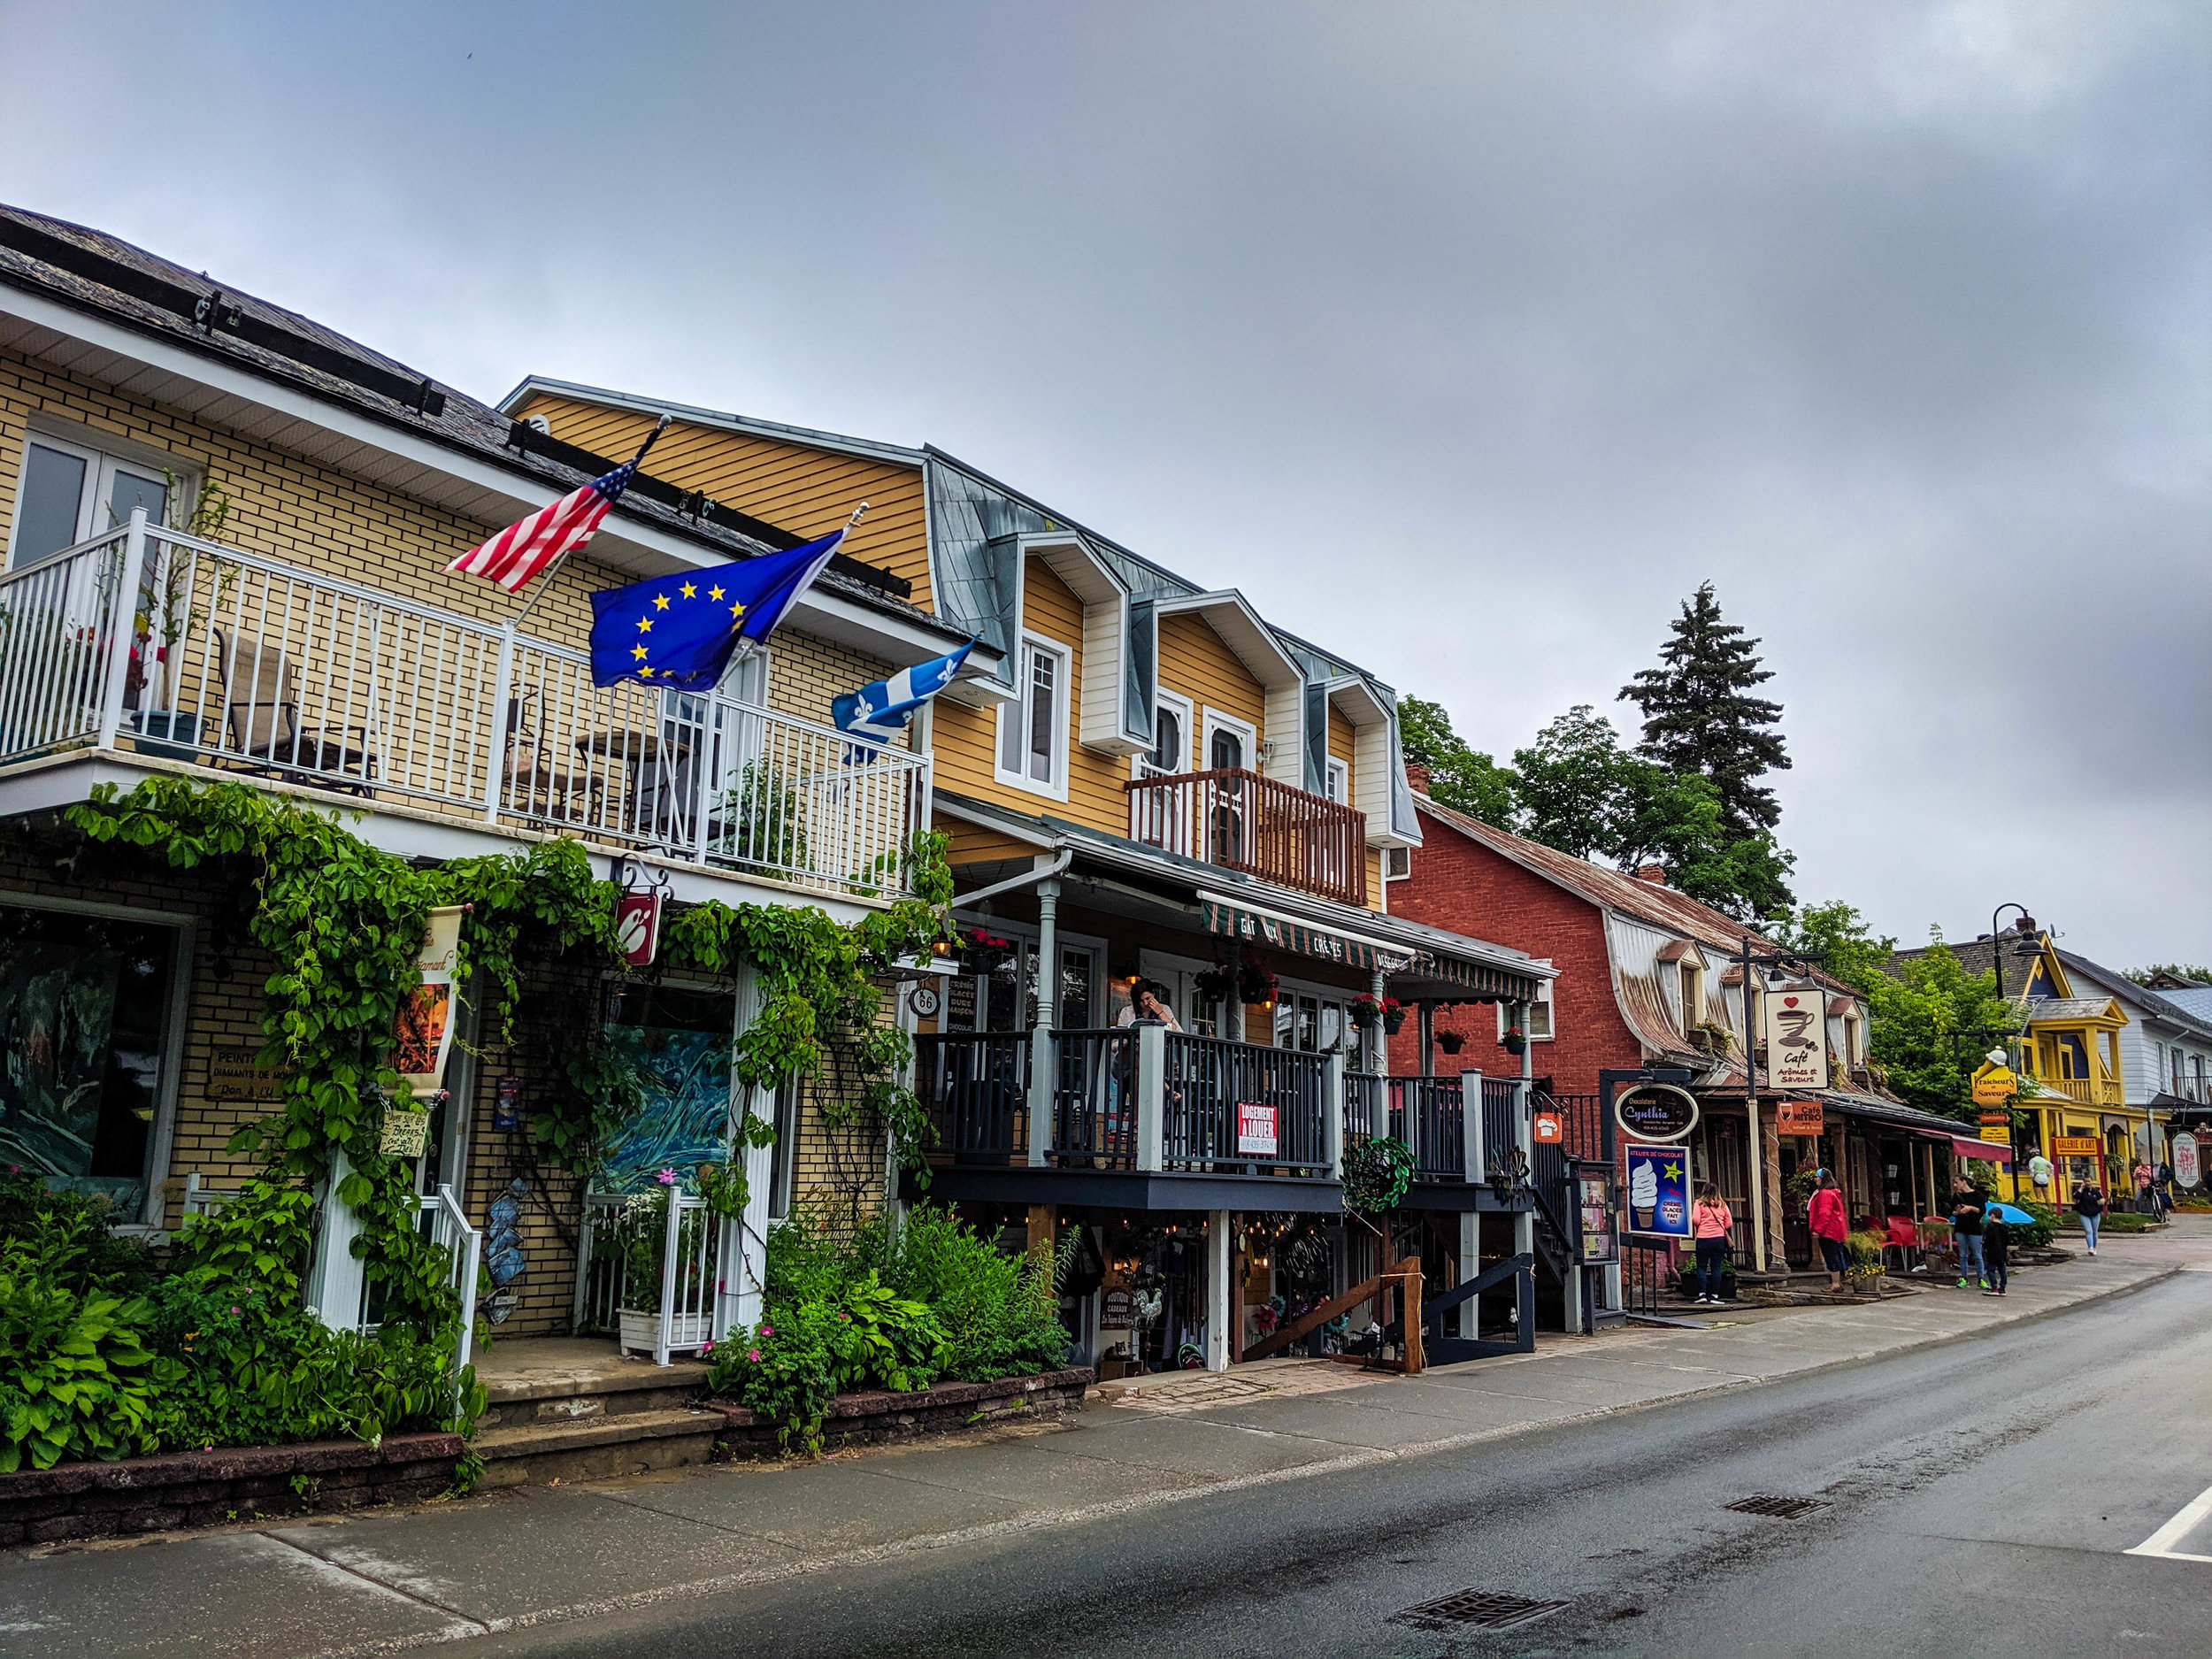 The colourful French Canadian village of Baie Saint Paul